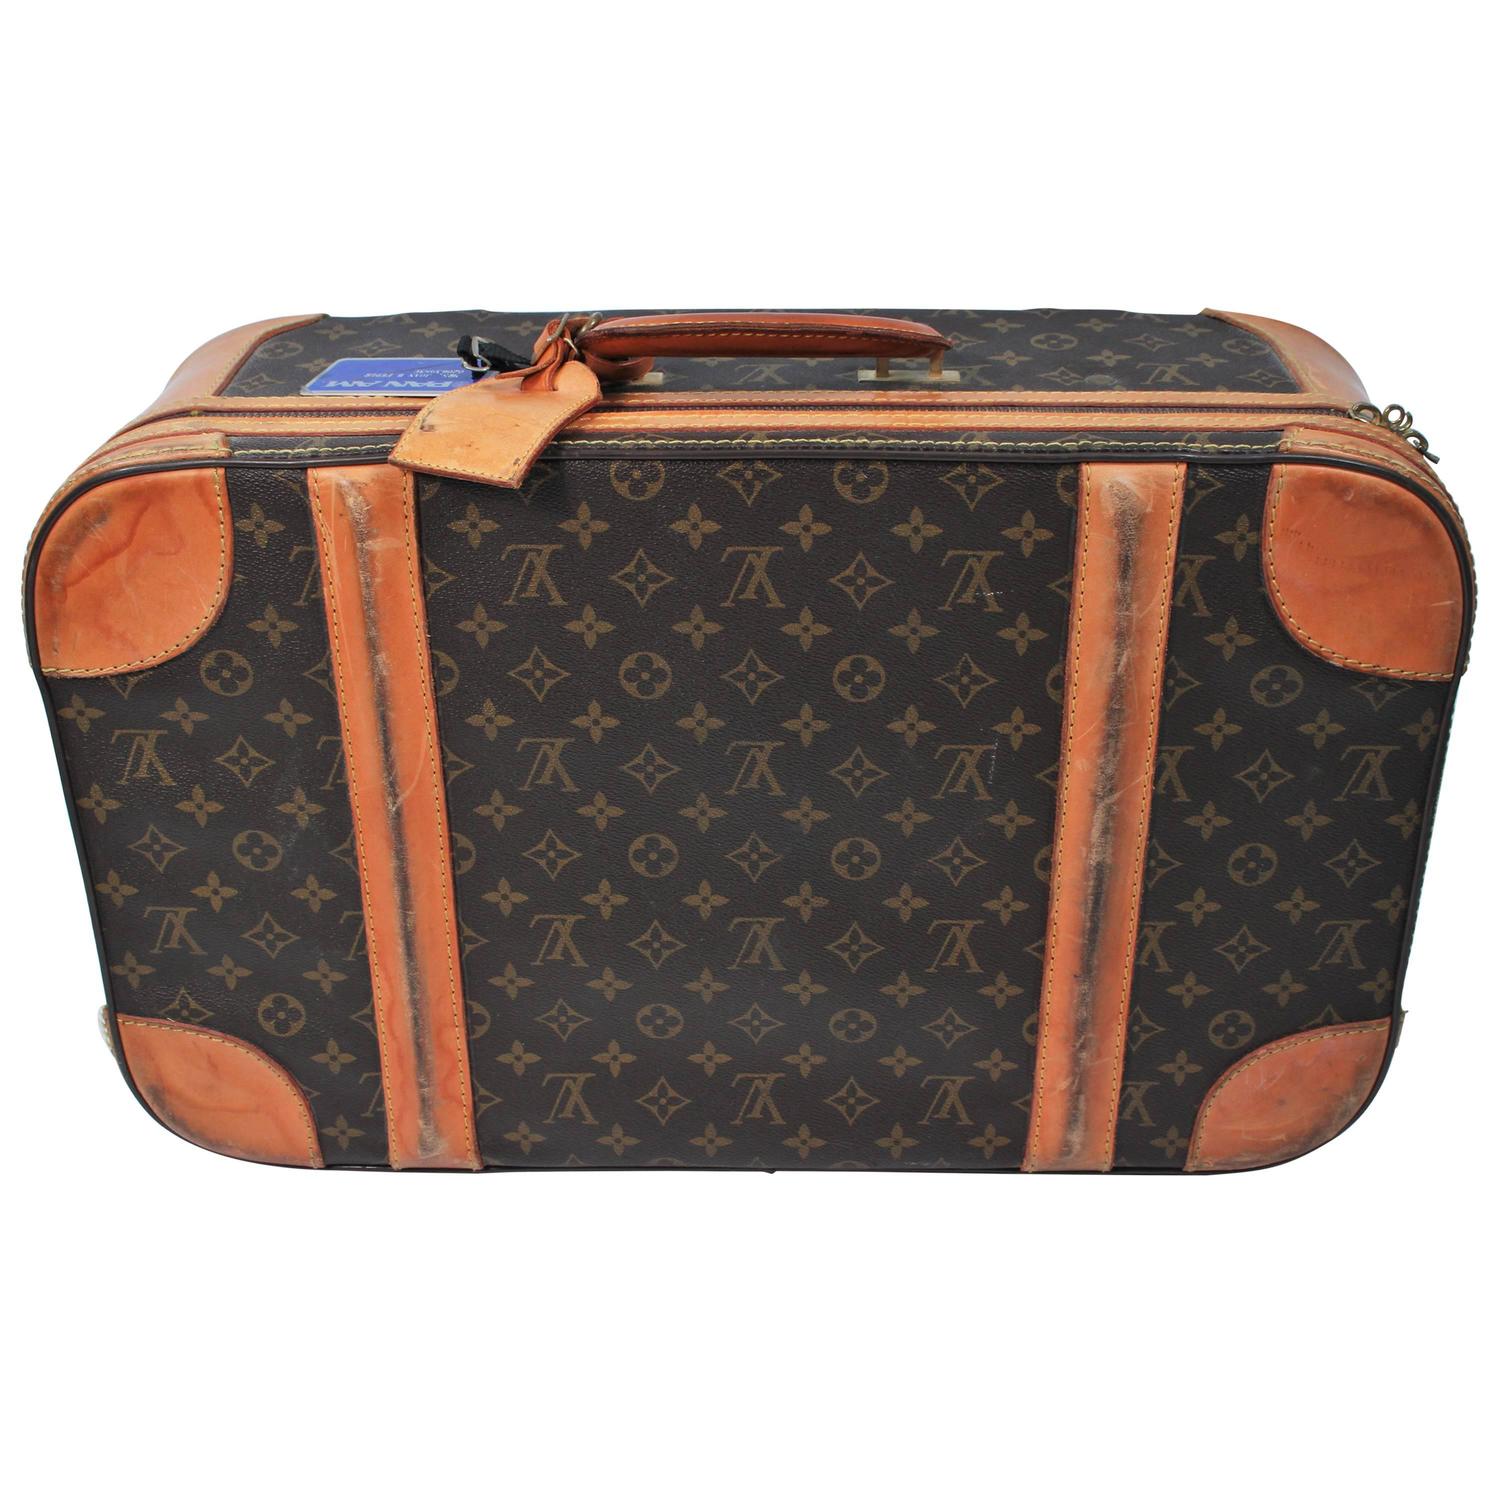 Lv Suitcase Carry One  Natural Resource Department